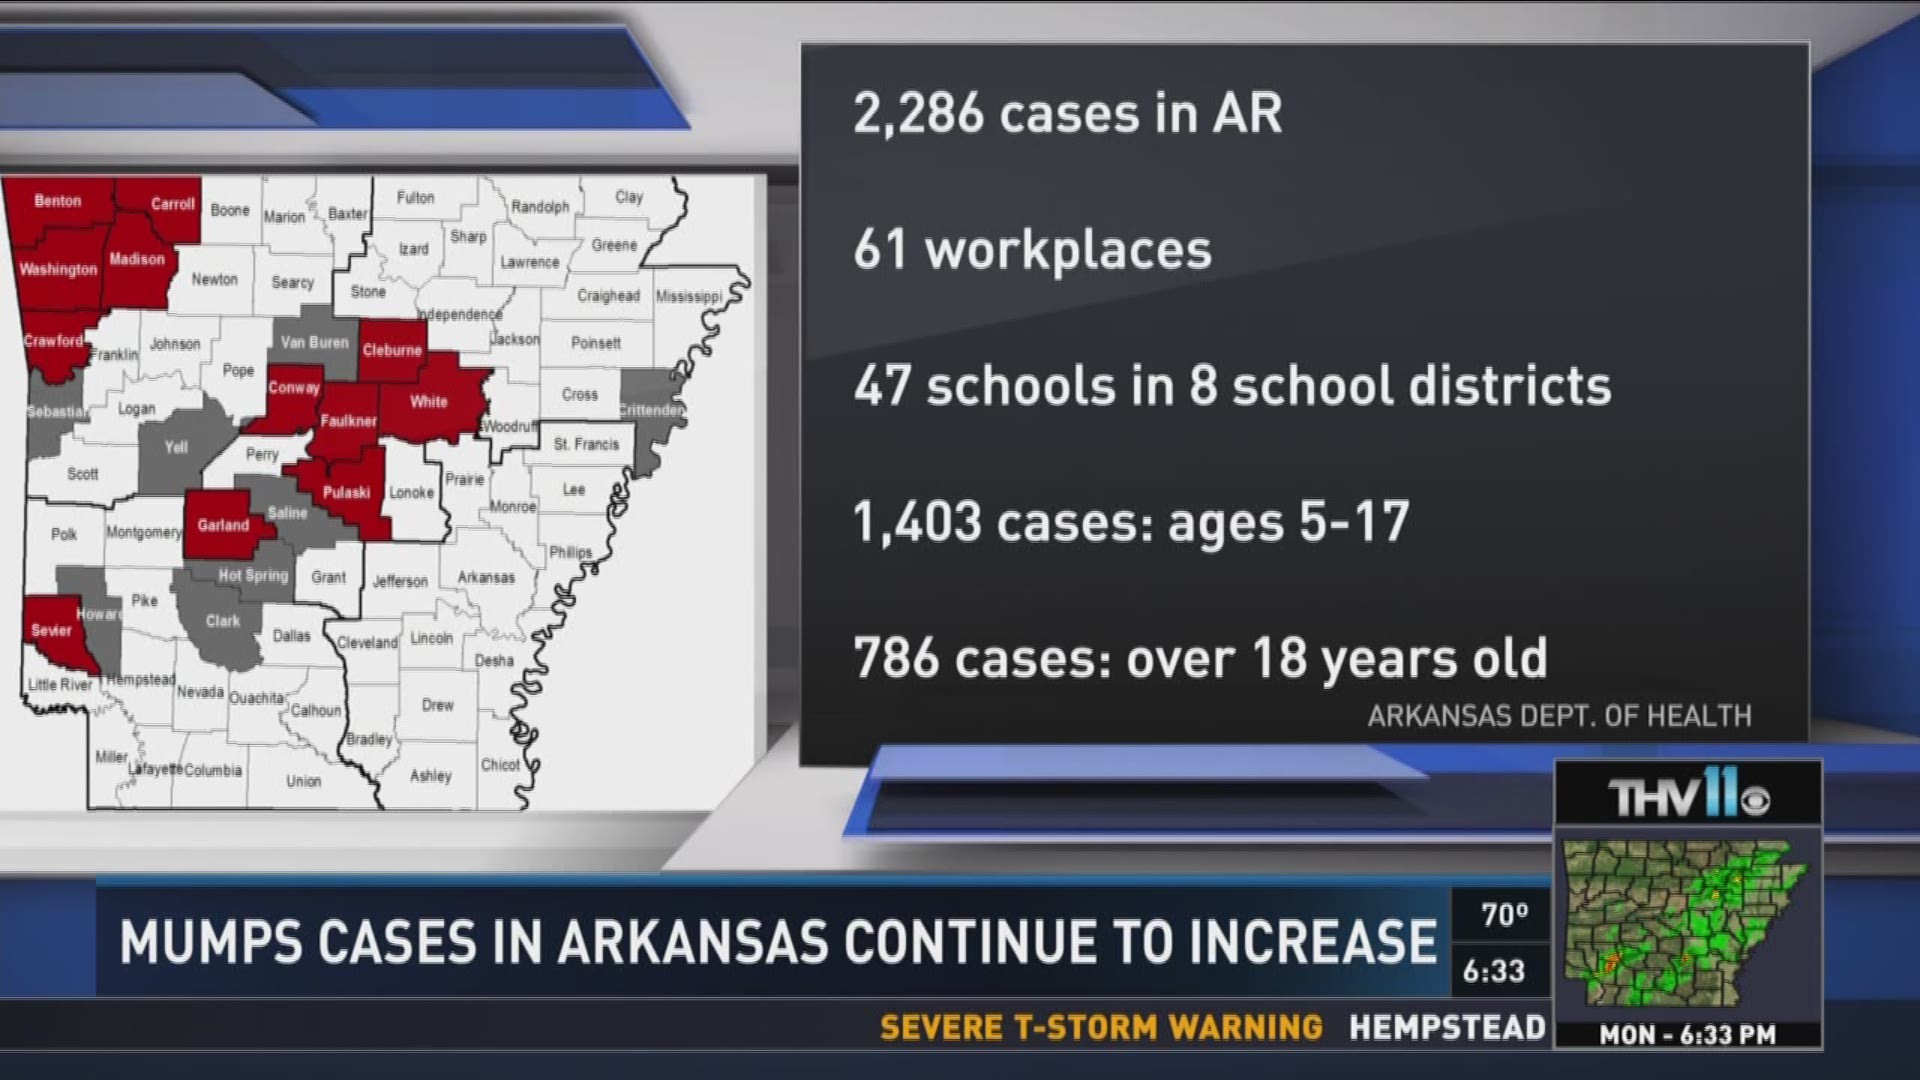 Mumps cases in Arkansas continue to increase